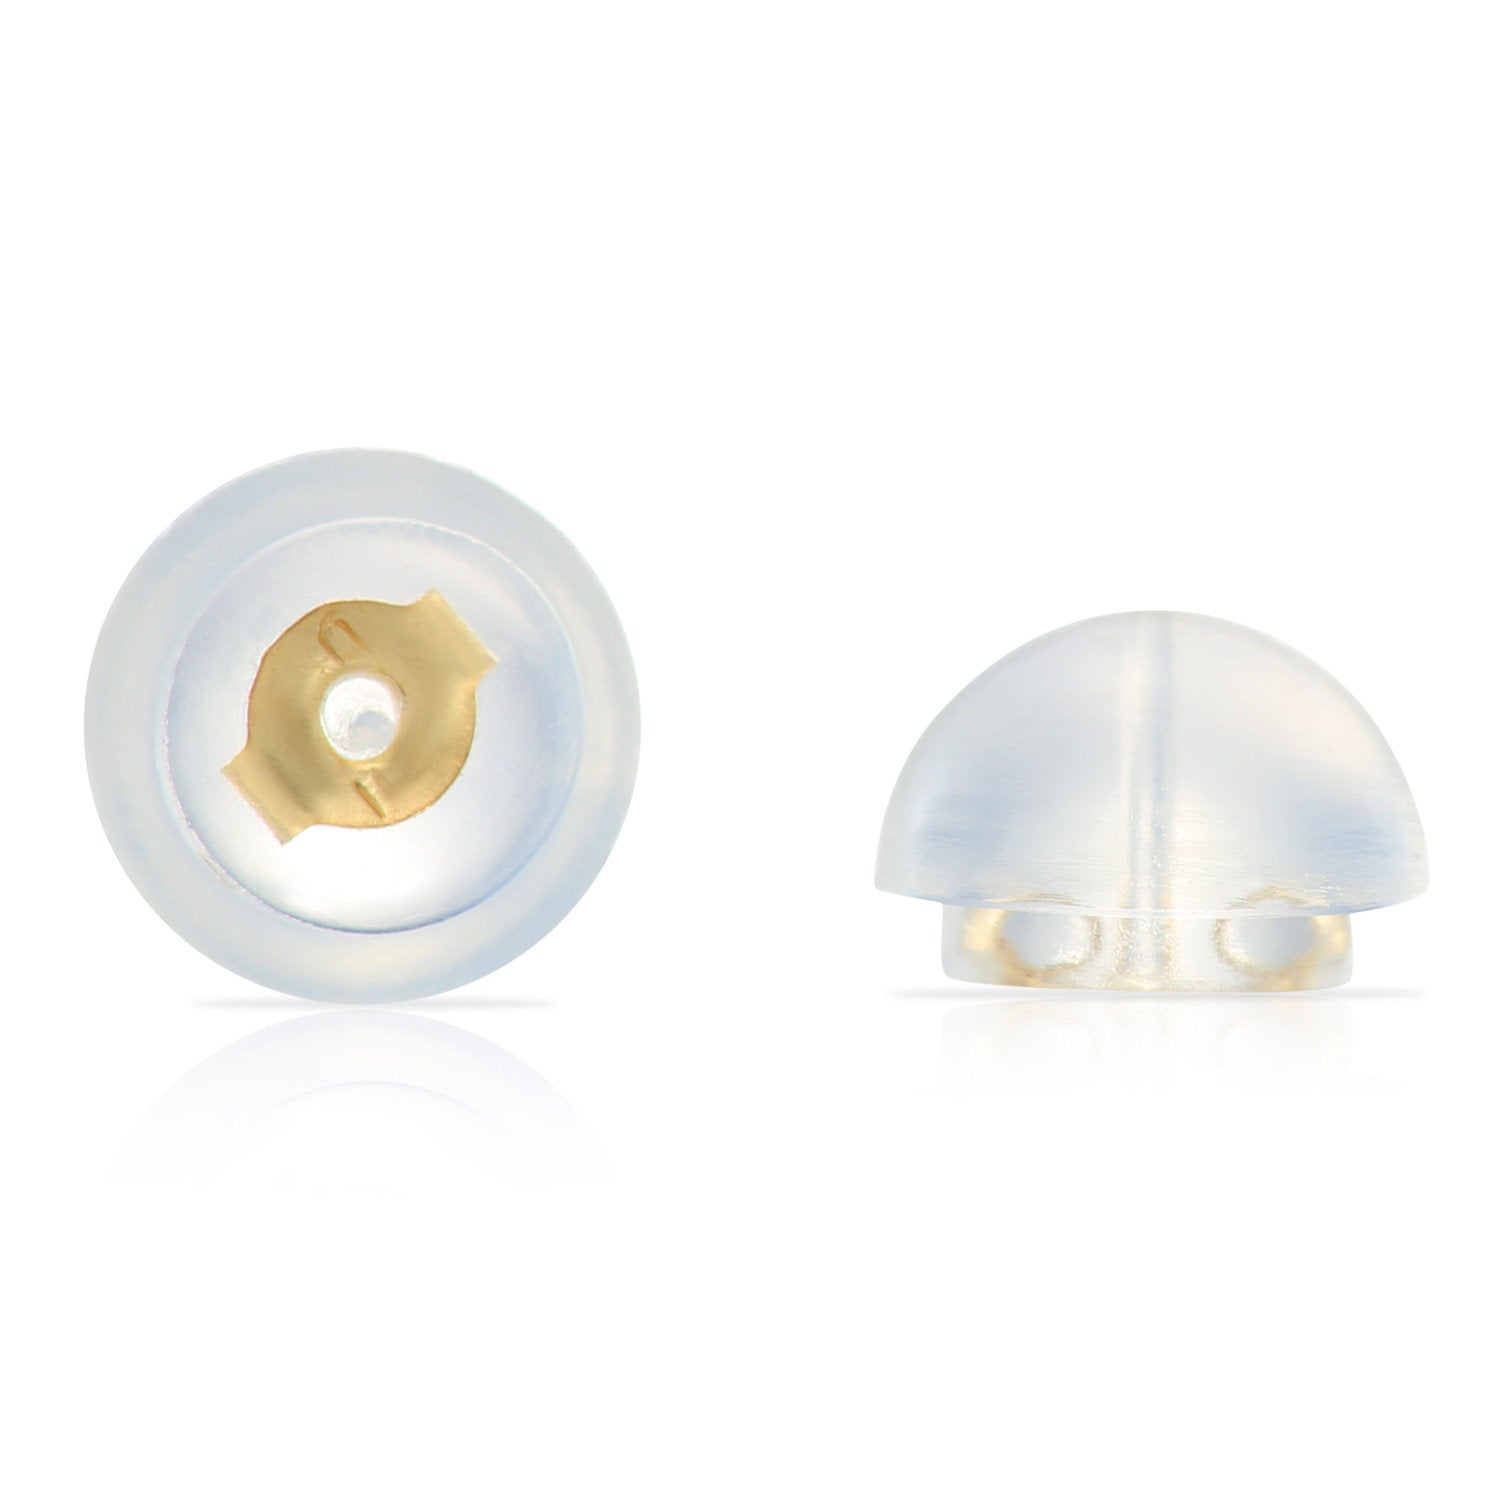 14K Yellow Gold Ball Stud Earrings, Silicone Covered Gold Push Backings (Unisex)